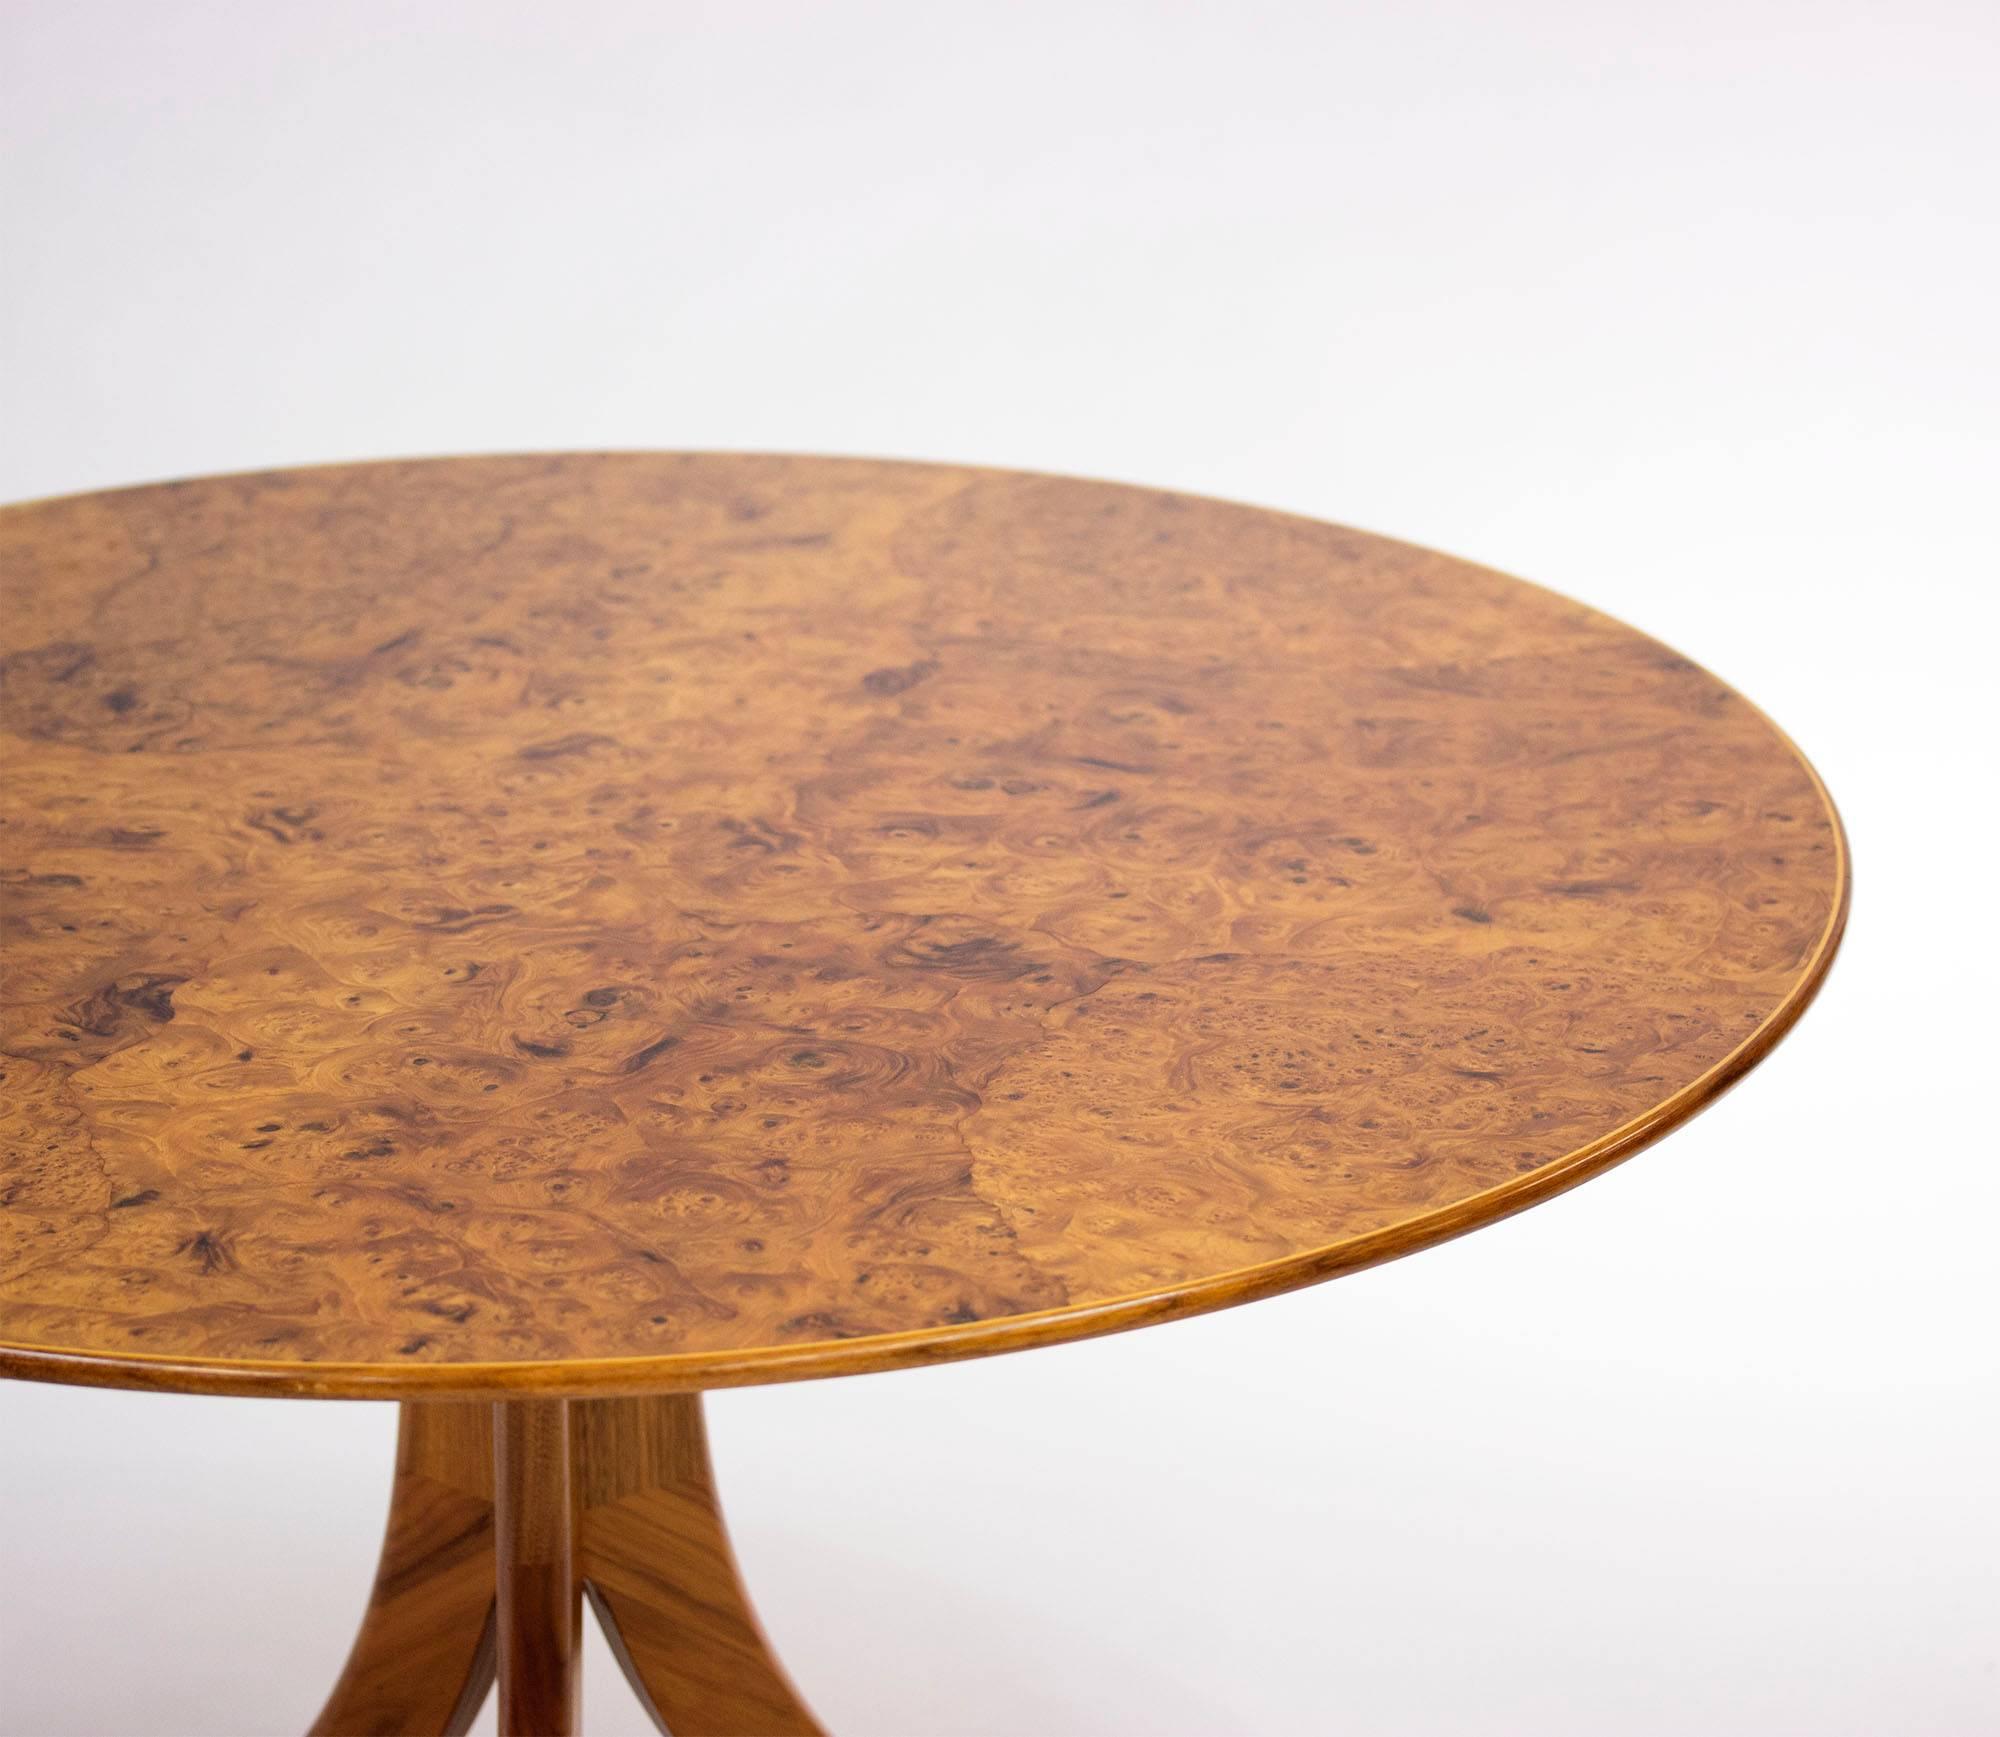 Coffee table by Josef Frank for Svenskt Tenn, with a dazzlingly beautiful alder root veneer tabletop on three sculpted mahogany legs. This model has been produced over several decades with small alterations being made to the design, this is a